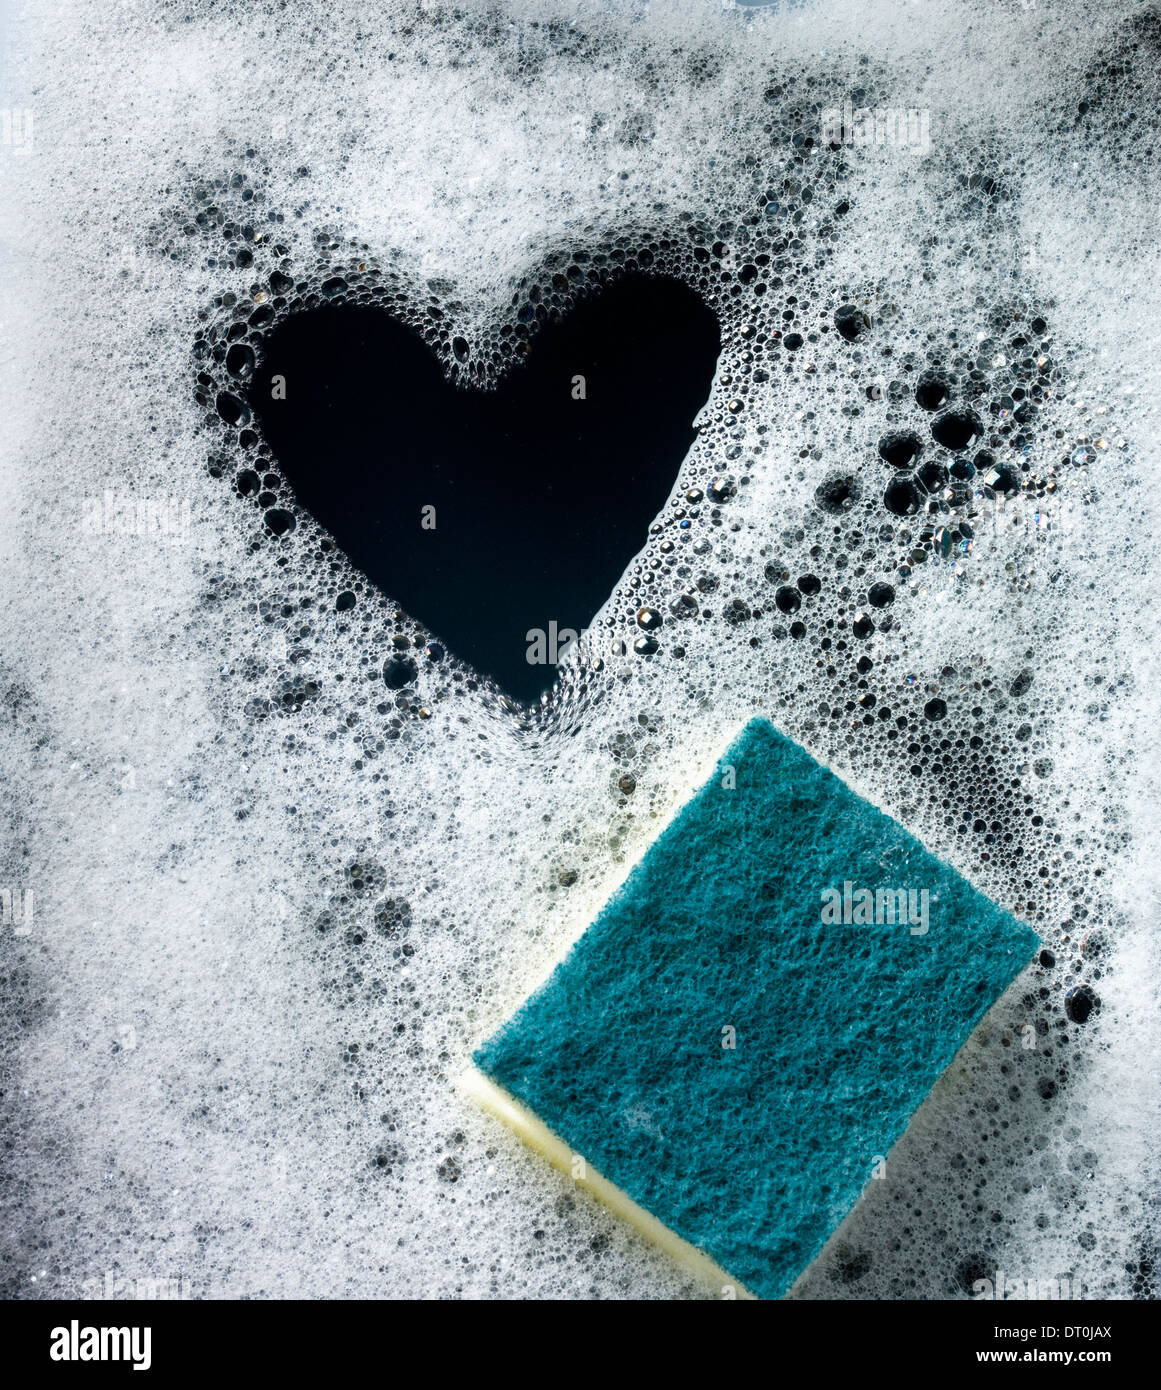 Heart shape in soap suds with green scourer Stock Photo